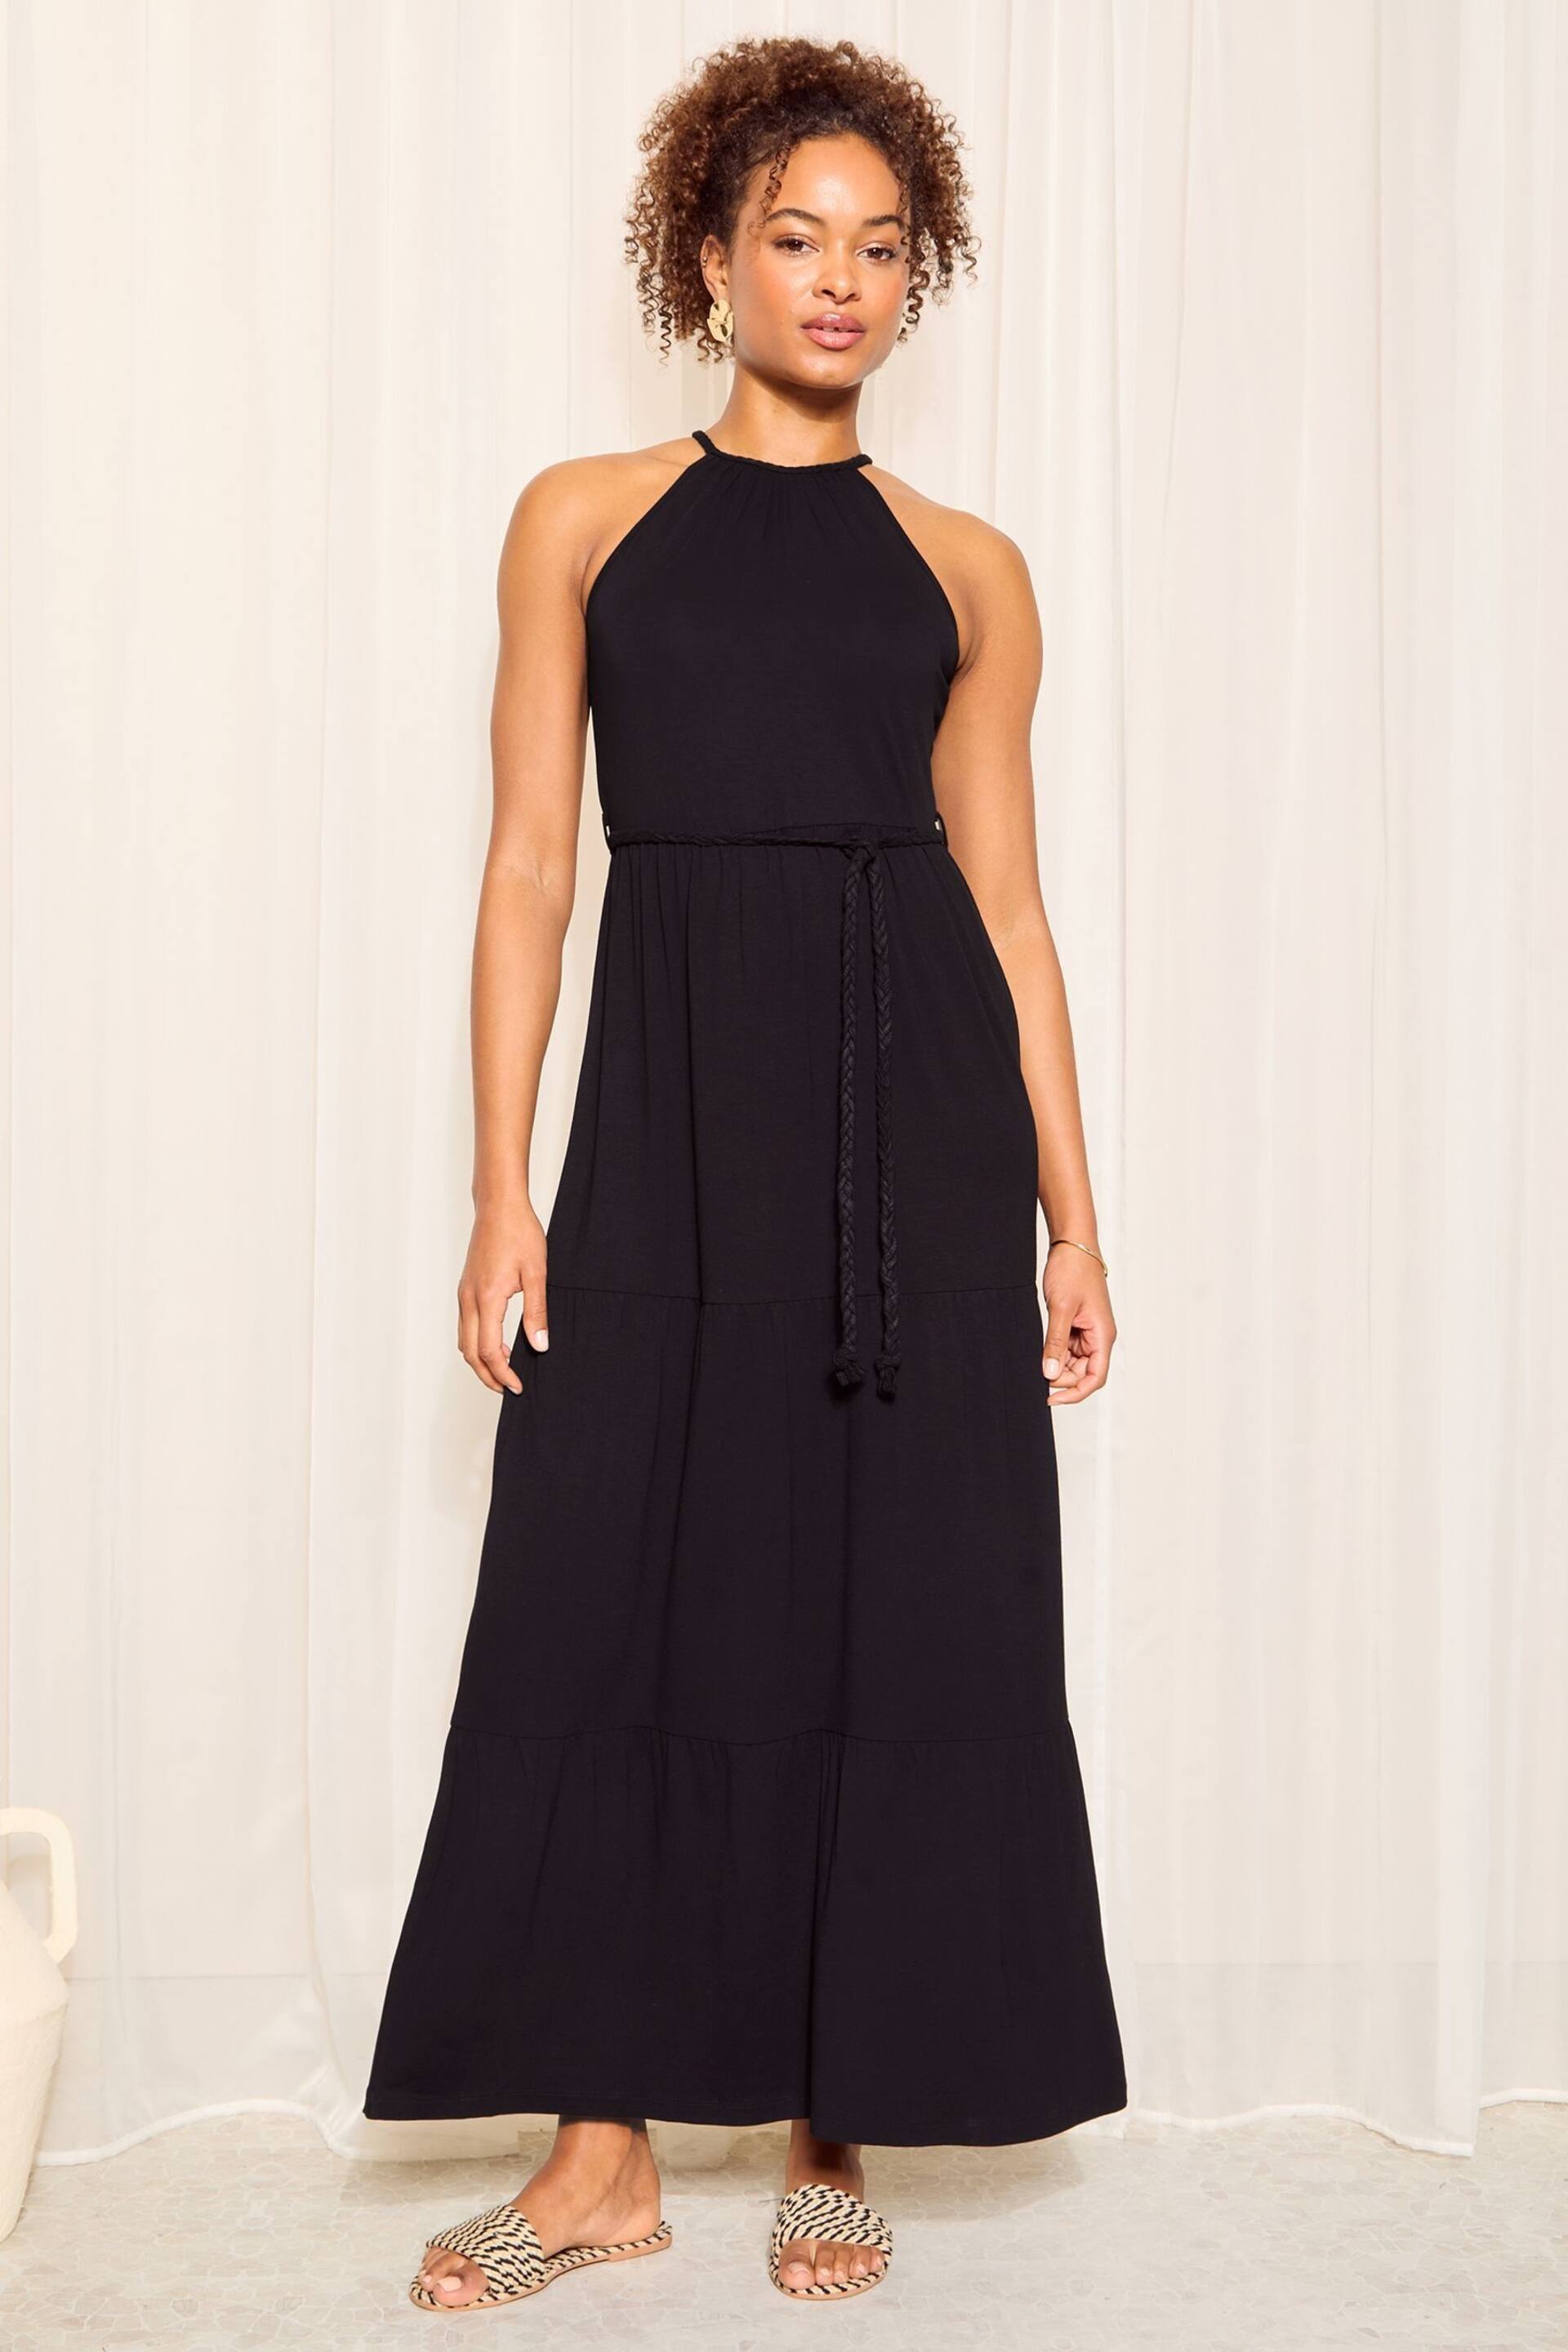 Friends Like These Black Halter Jersey Dress With Tie Belt - Image 1 of 4